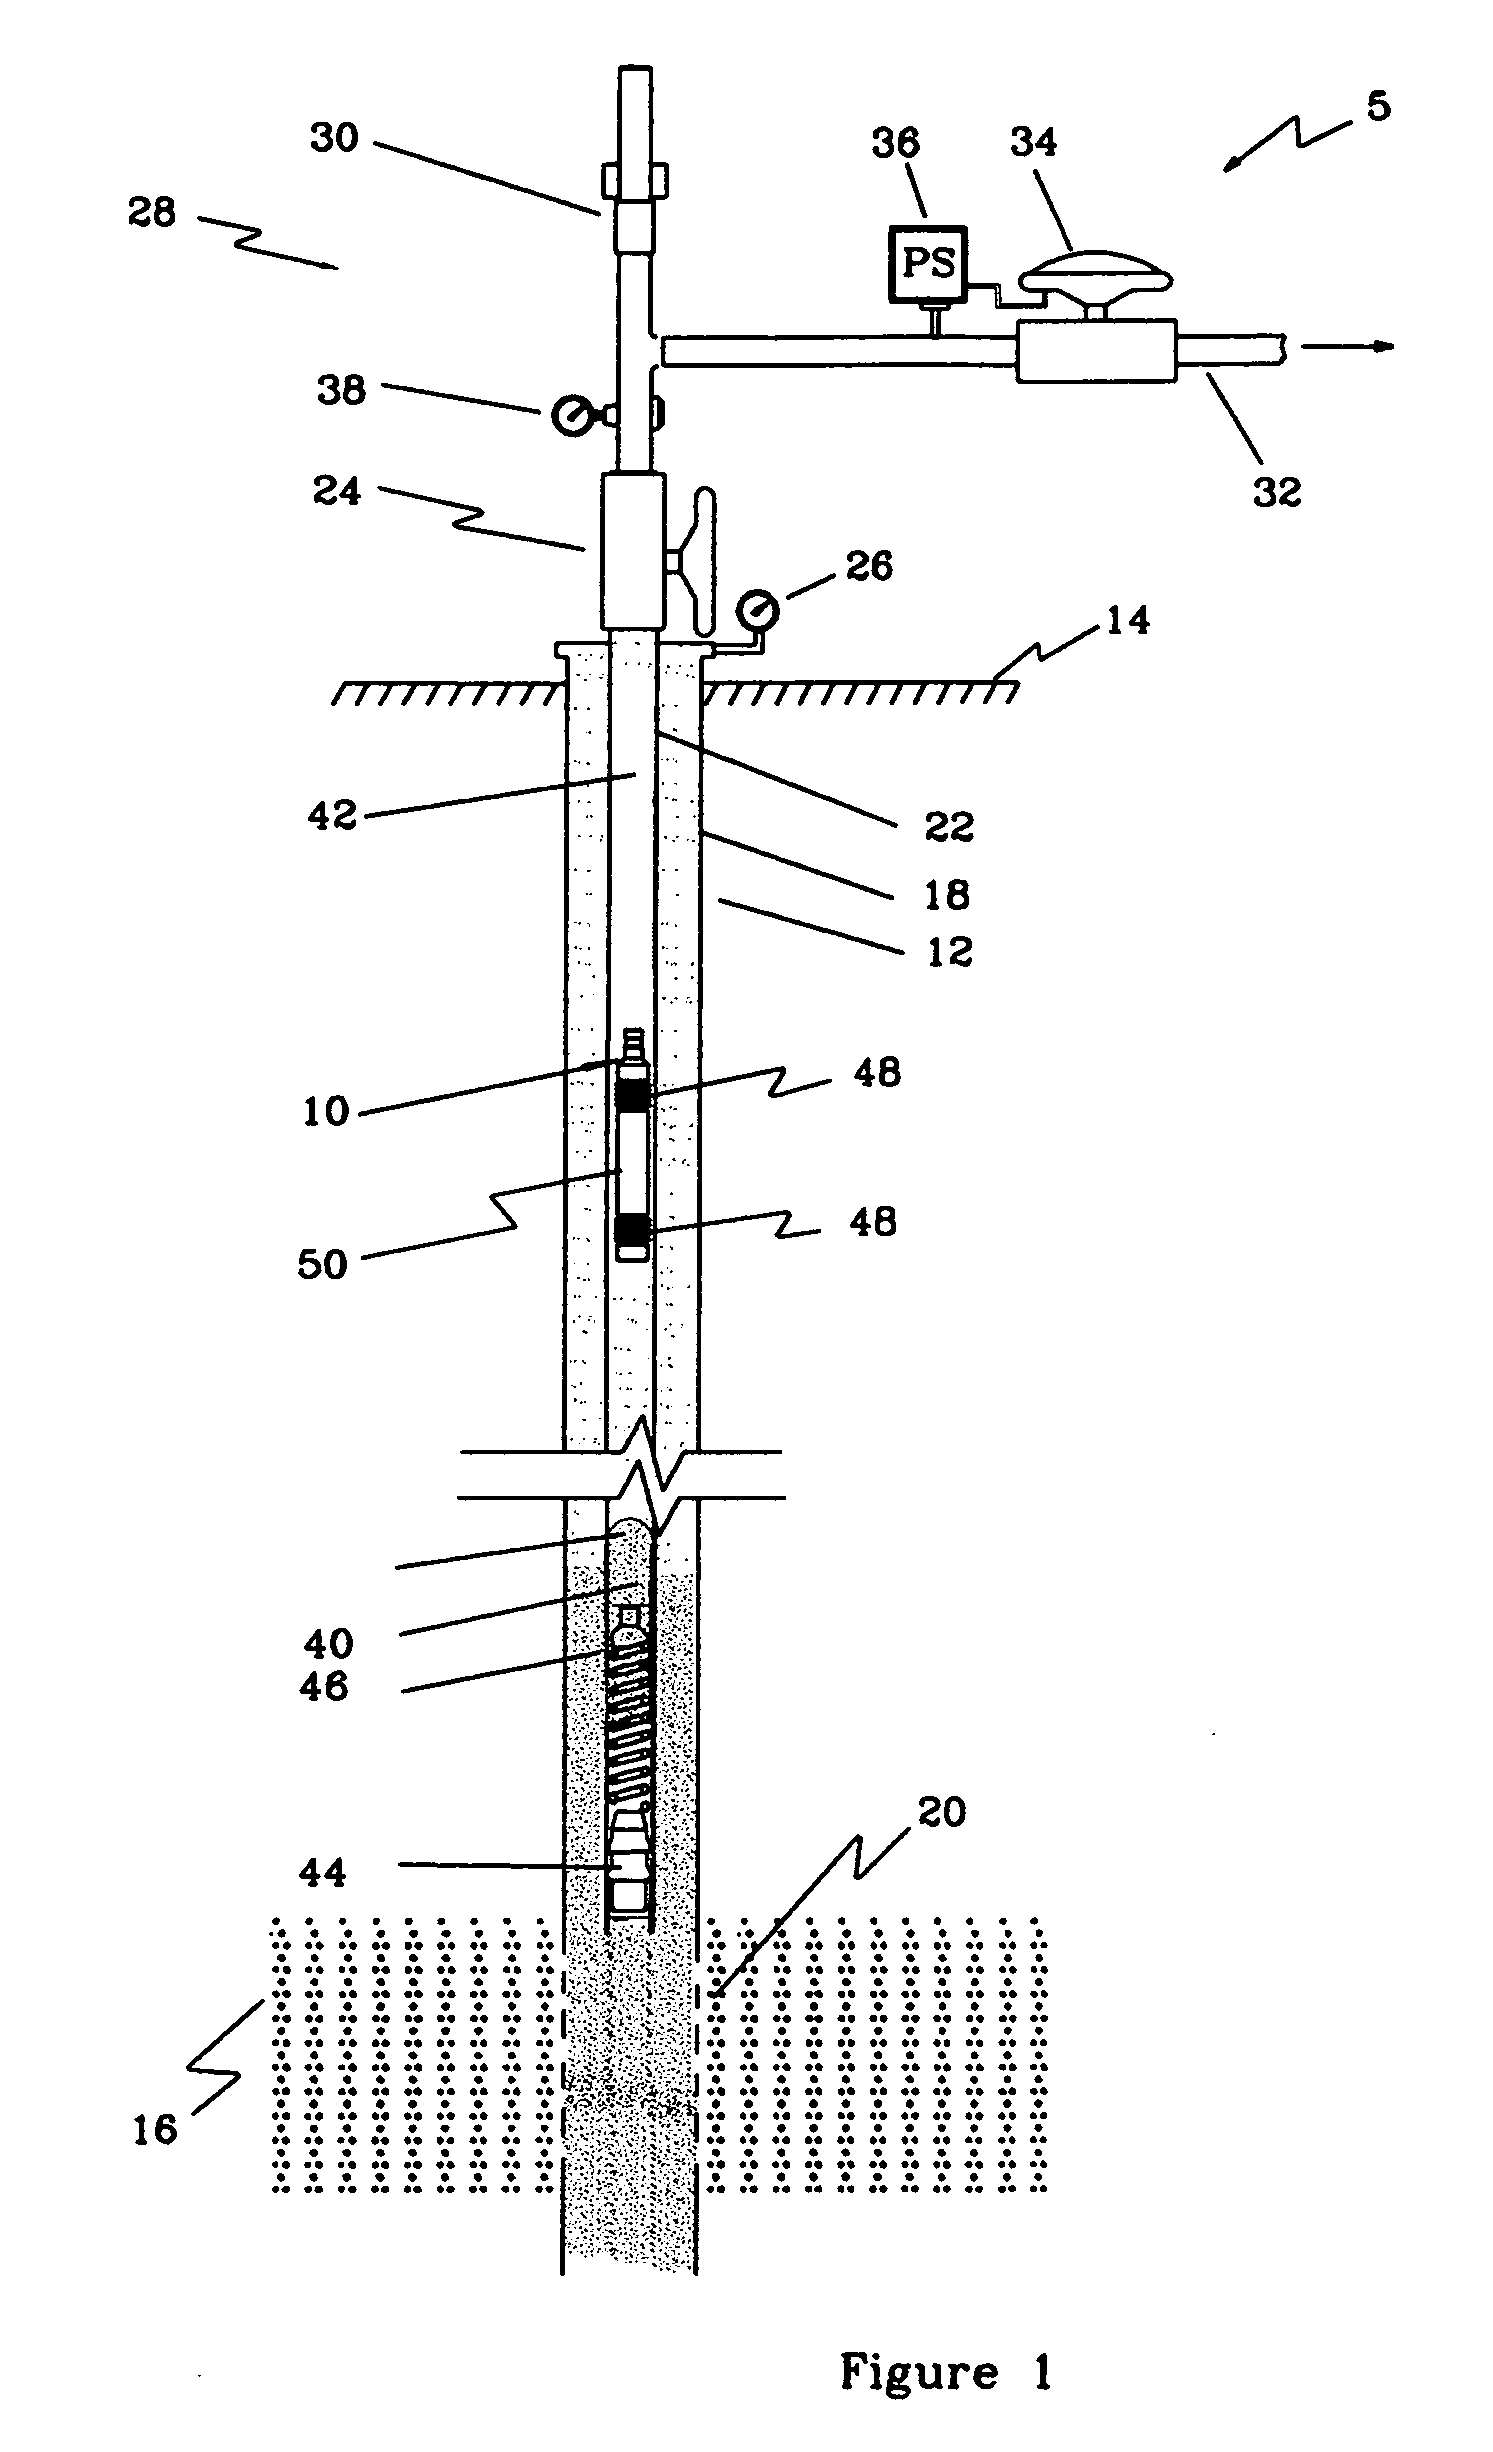 Interference-seal plunger for an artificial lift system